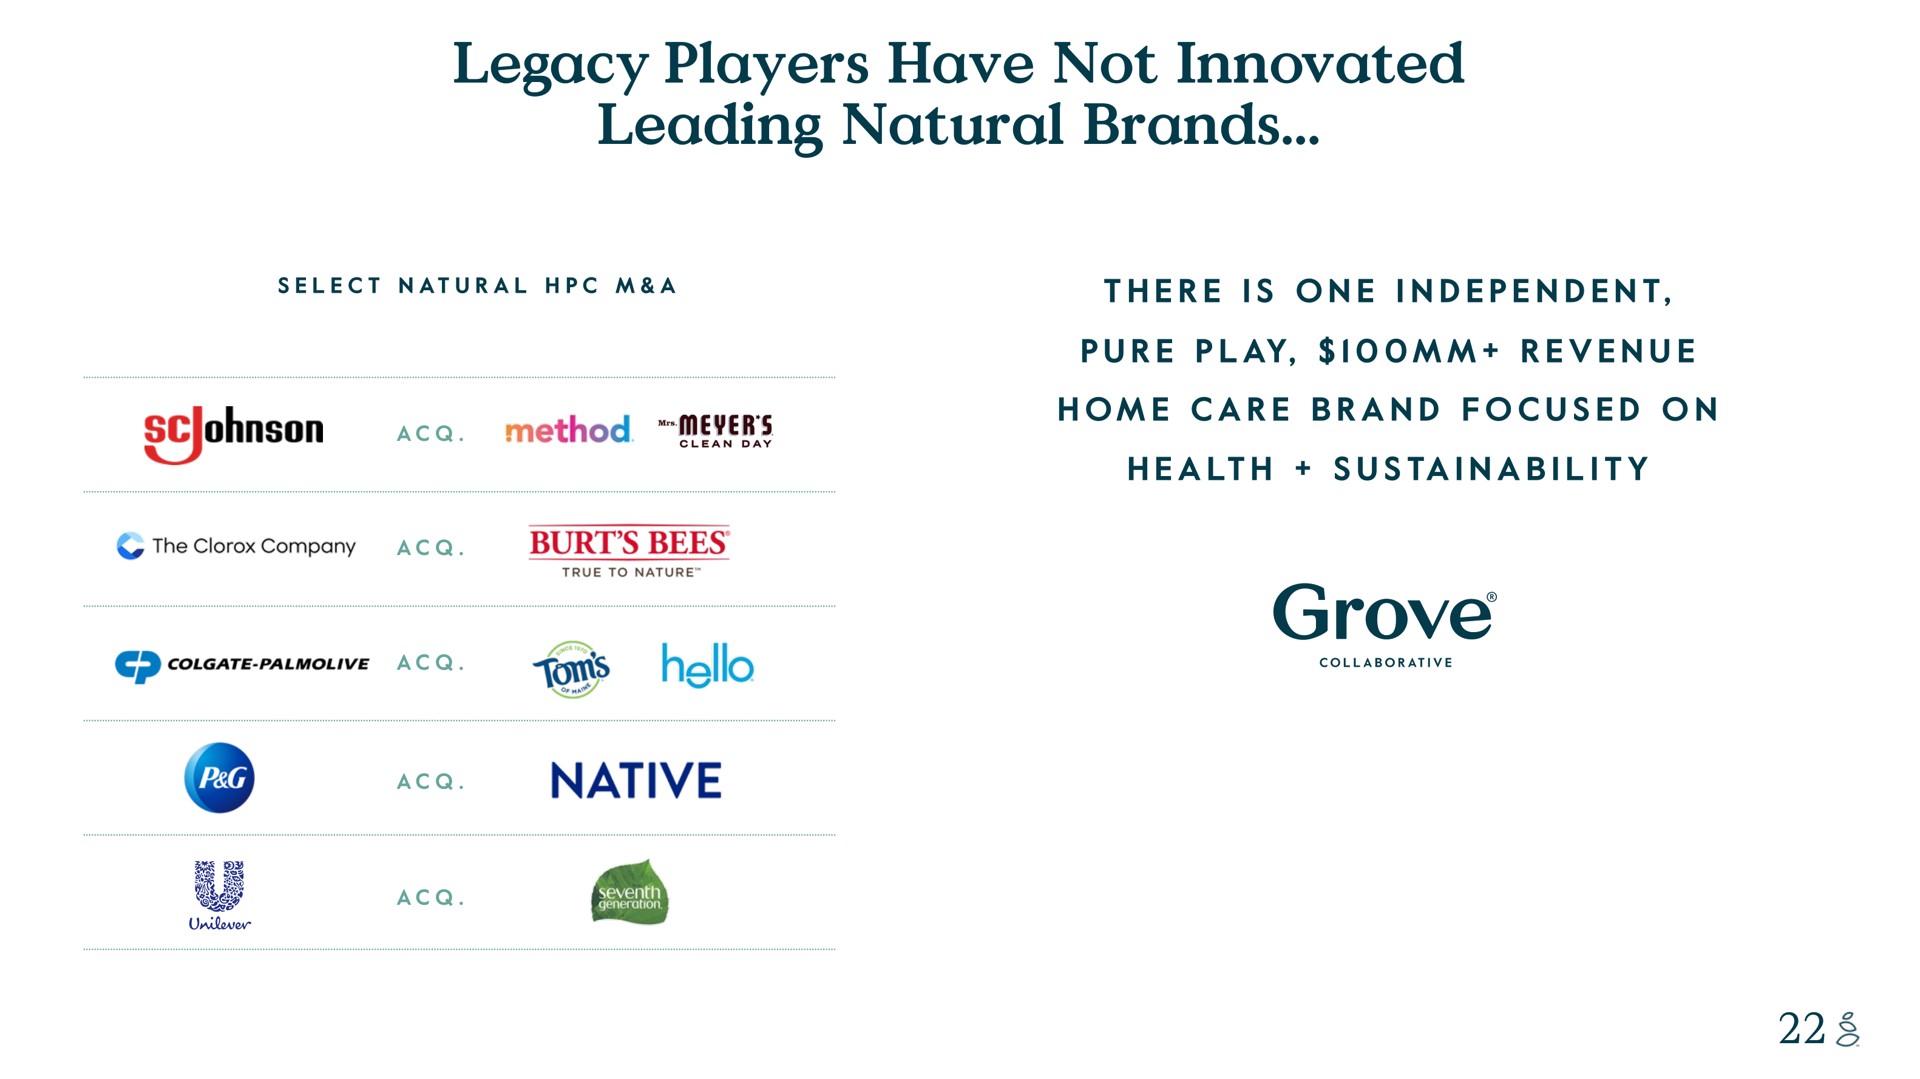 legacy players have not innovated leading natural brands waters men there is one independent pure play revenue method home care brand focused on health grove collaborative the burt bees true to nature or a i oer | Grove